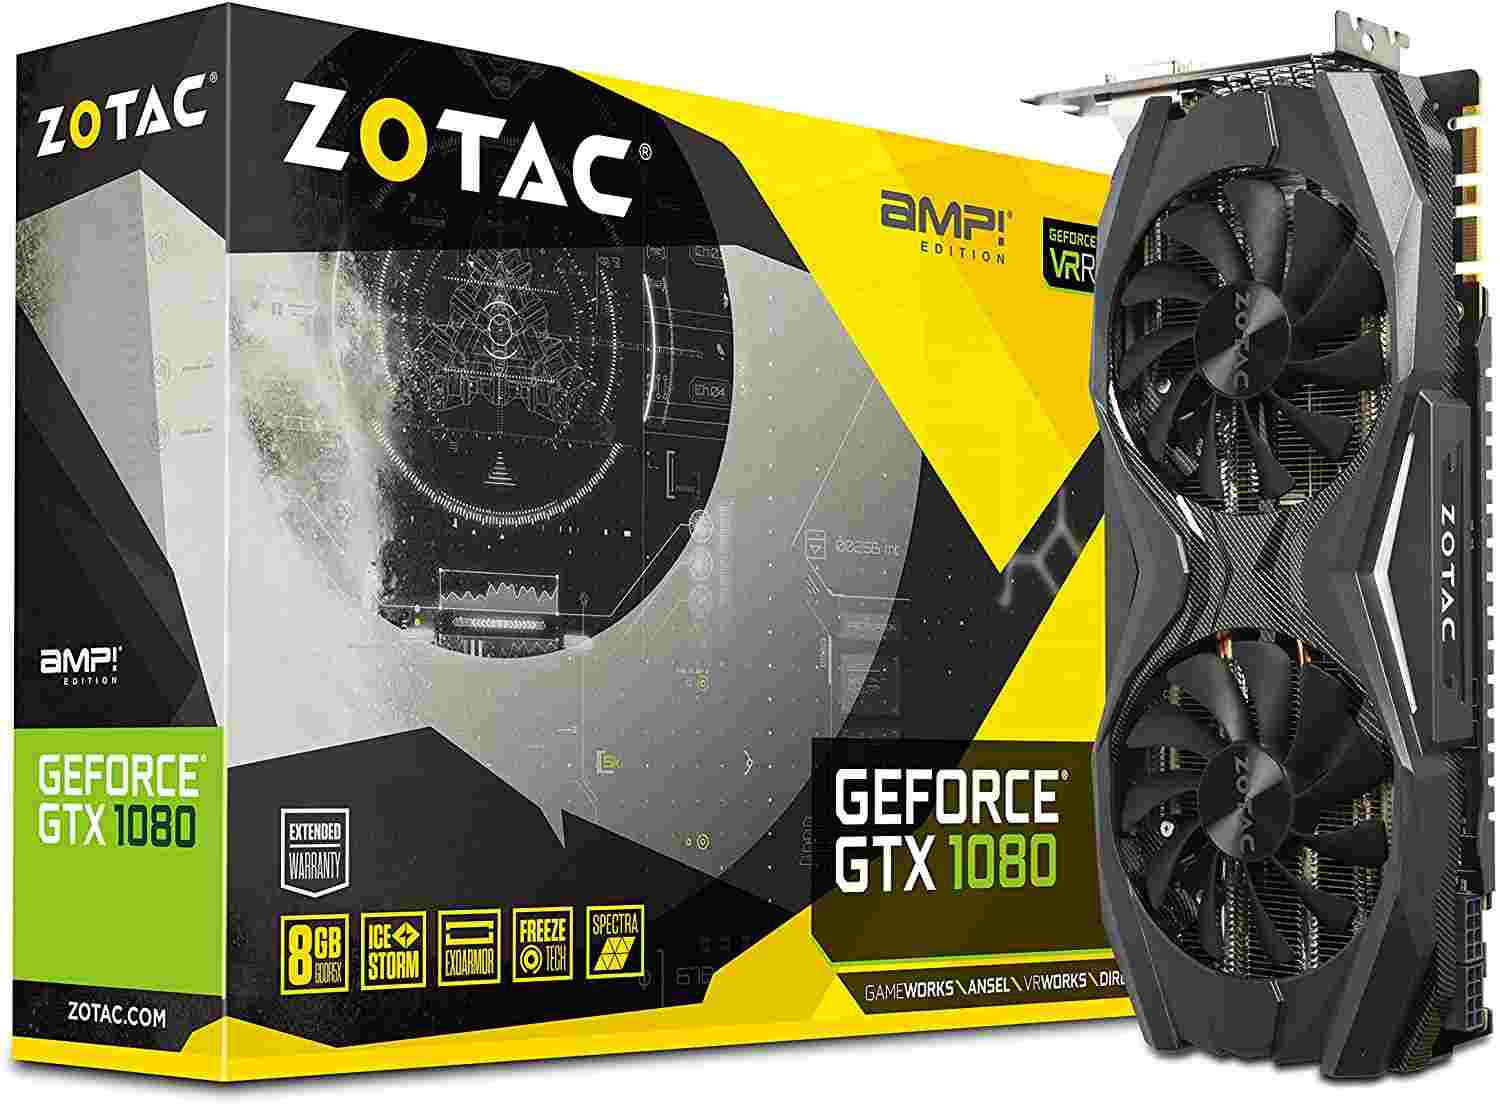 Zotac - best graphics card for rendering